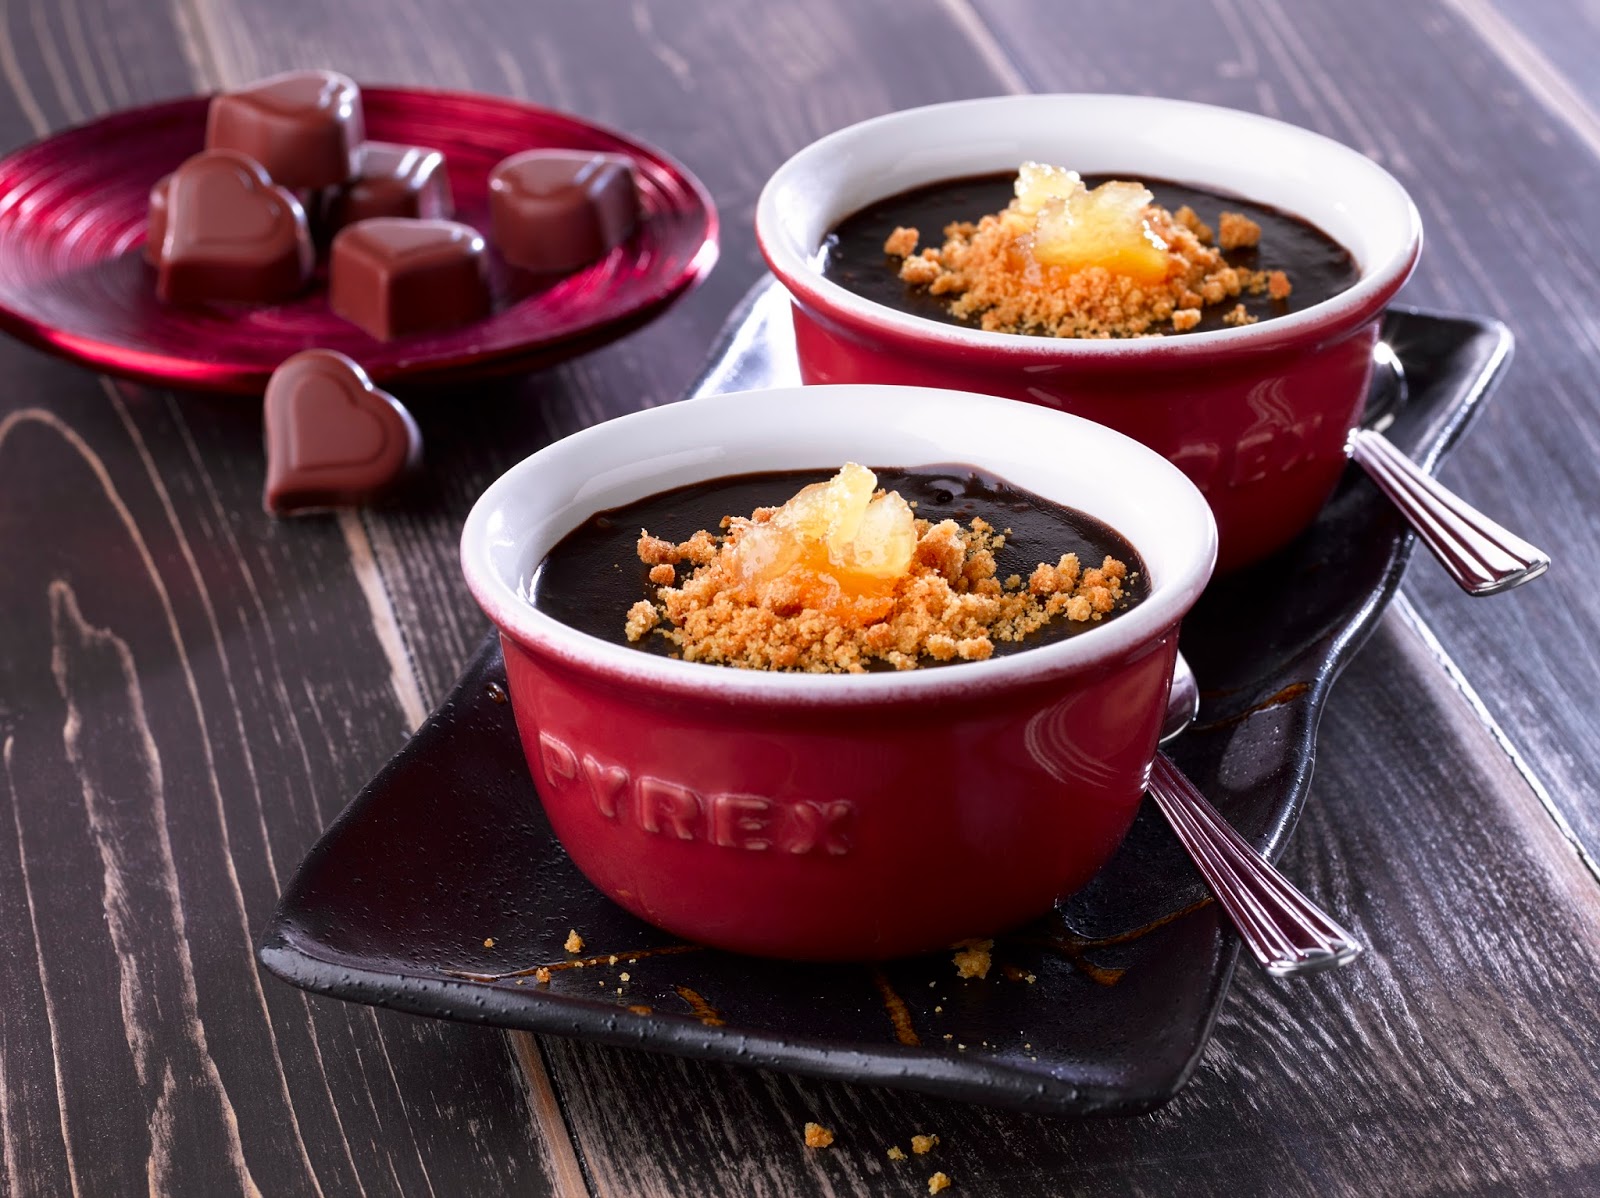 Ginger And Chocolate Pot: Valentines Treat